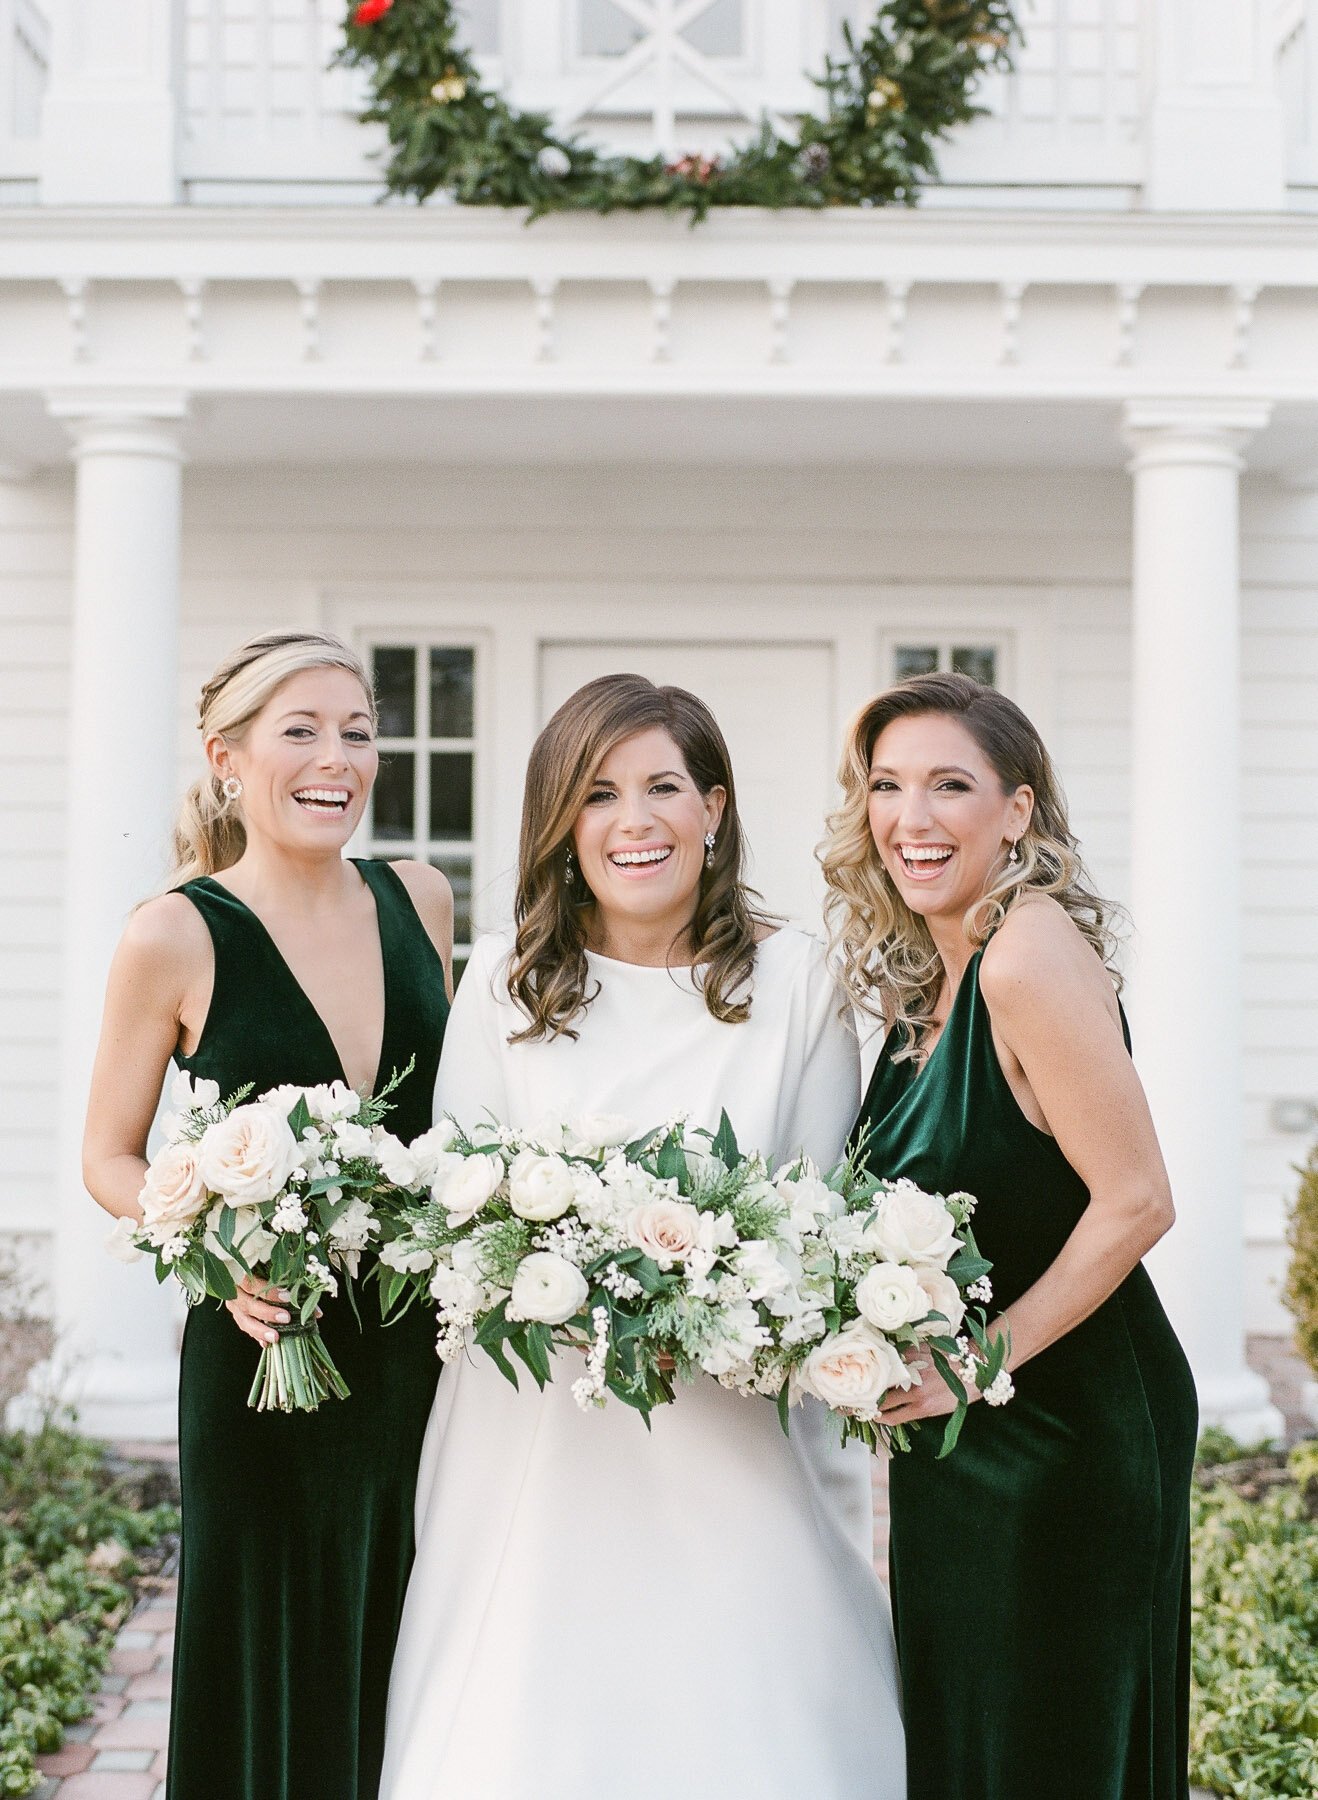 Ryland Inn Coach House Winter Wedding Twisted Willow Flowers and Jenny Yoo Green Velvet Bridesmaid Dresses